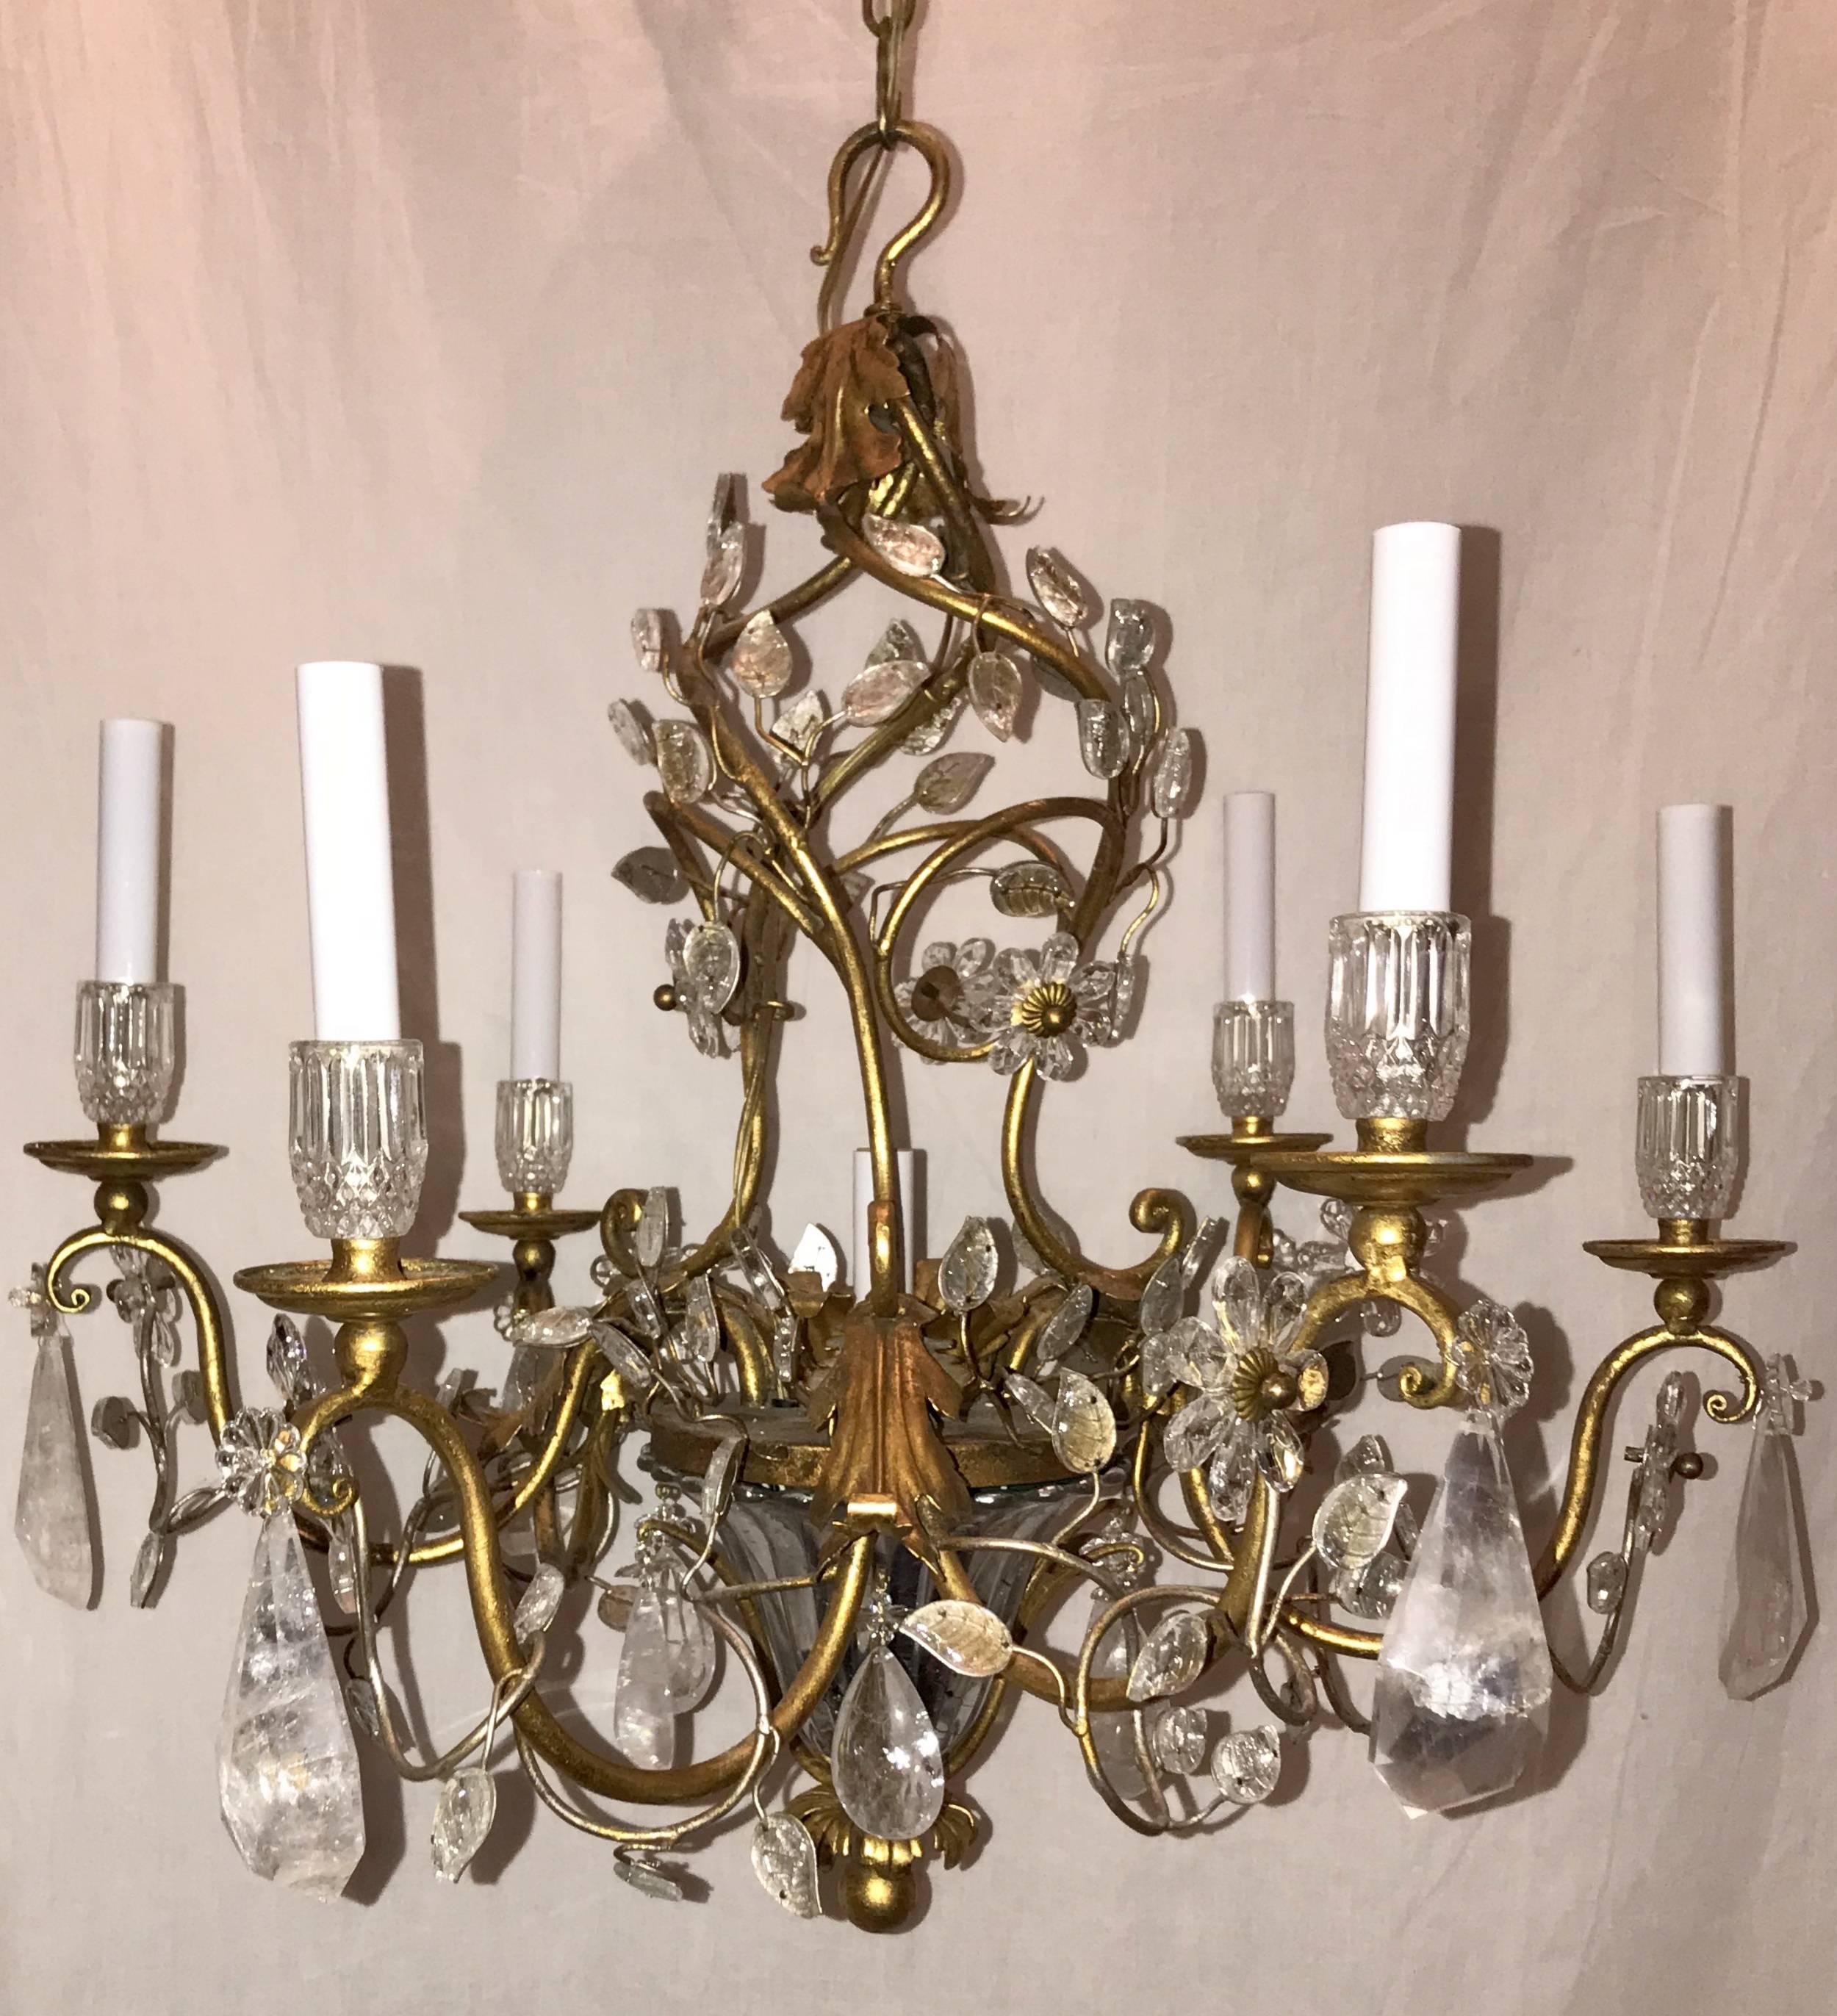 A Beautiful French gold gold midcentury Baguès style, rock crystal and leaf basket form chandelier with six candelabrum lights
 
Mesures réelles :
27